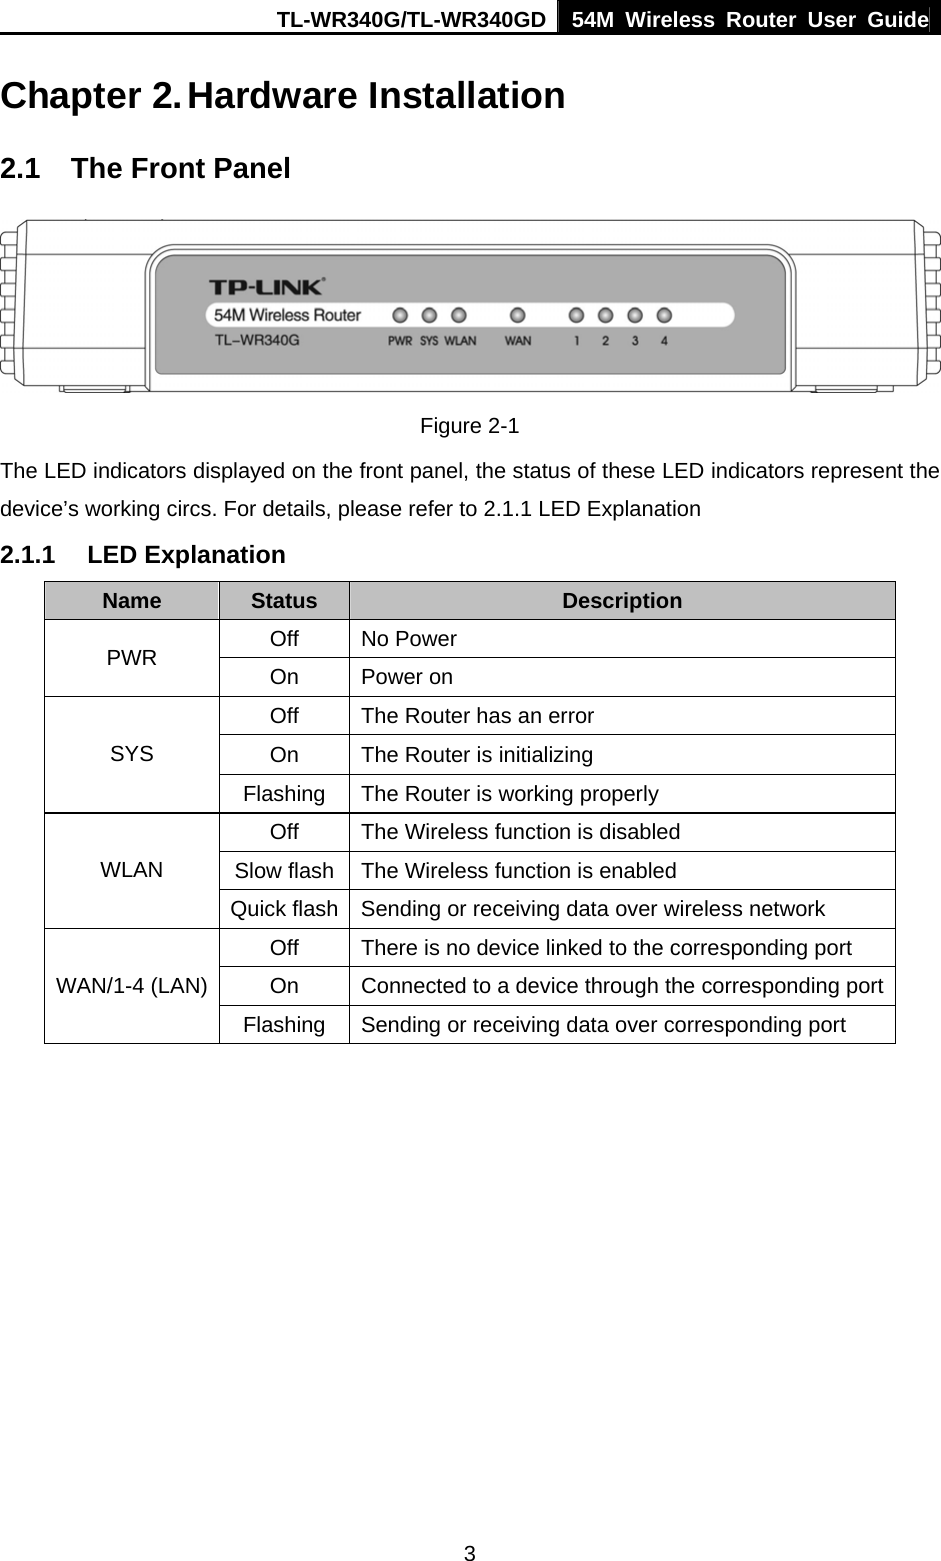 TL-WR340G/TL-WR340GD 54M Wireless Router User Guide  3 Chapter 2. Hardware Installation 2.1  The Front Panel  Figure 2-1 The LED indicators displayed on the front panel, the status of these LED indicators represent the device’s working circs. For details, please refer to 2.1.1 LED Explanation 2.1.1 LED Explanation Name  Status  Description Off No Power PWR  On Power on Off  The Router has an error On  The Router is initializing SYS Flashing  The Router is working properly Off  The Wireless function is disabled Slow flash  The Wireless function is enabled WLAN Quick flash  Sending or receiving data over wireless network Off  There is no device linked to the corresponding port On  Connected to a device through the corresponding portWAN/1-4 (LAN) Flashing  Sending or receiving data over corresponding port 